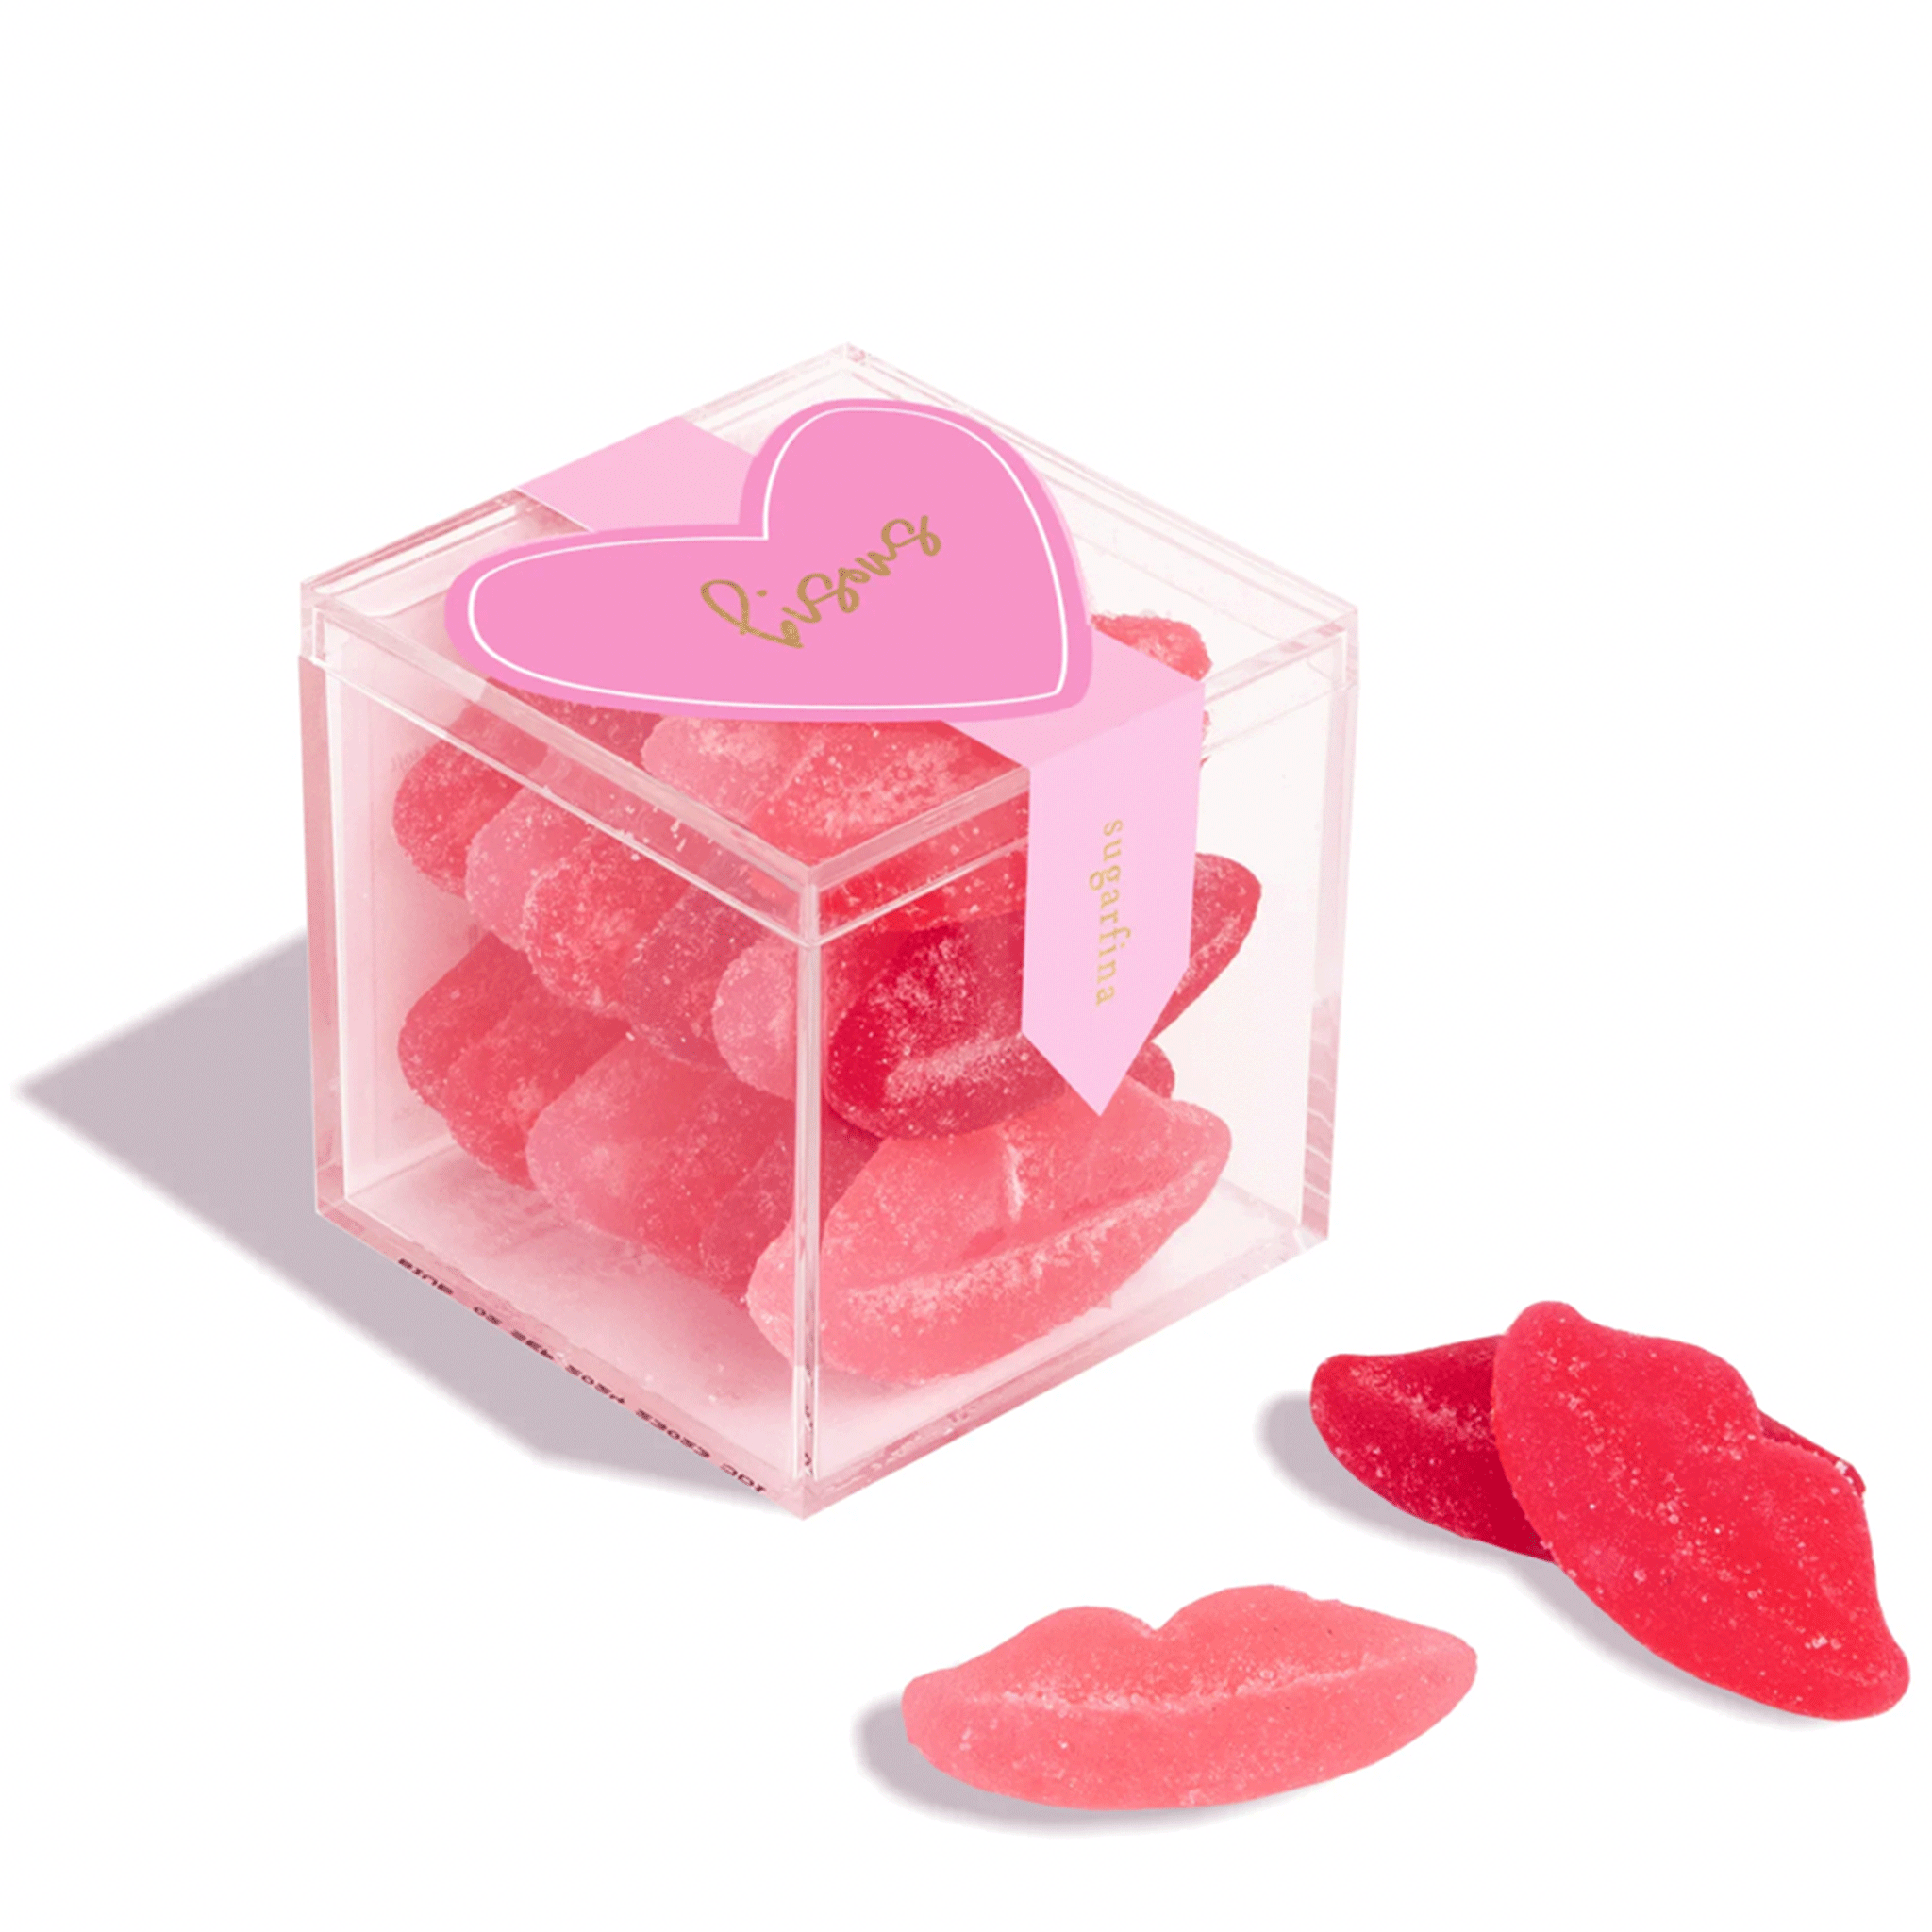 On a white background is a clear acrylic box filled with sugar lips gummy candies. 